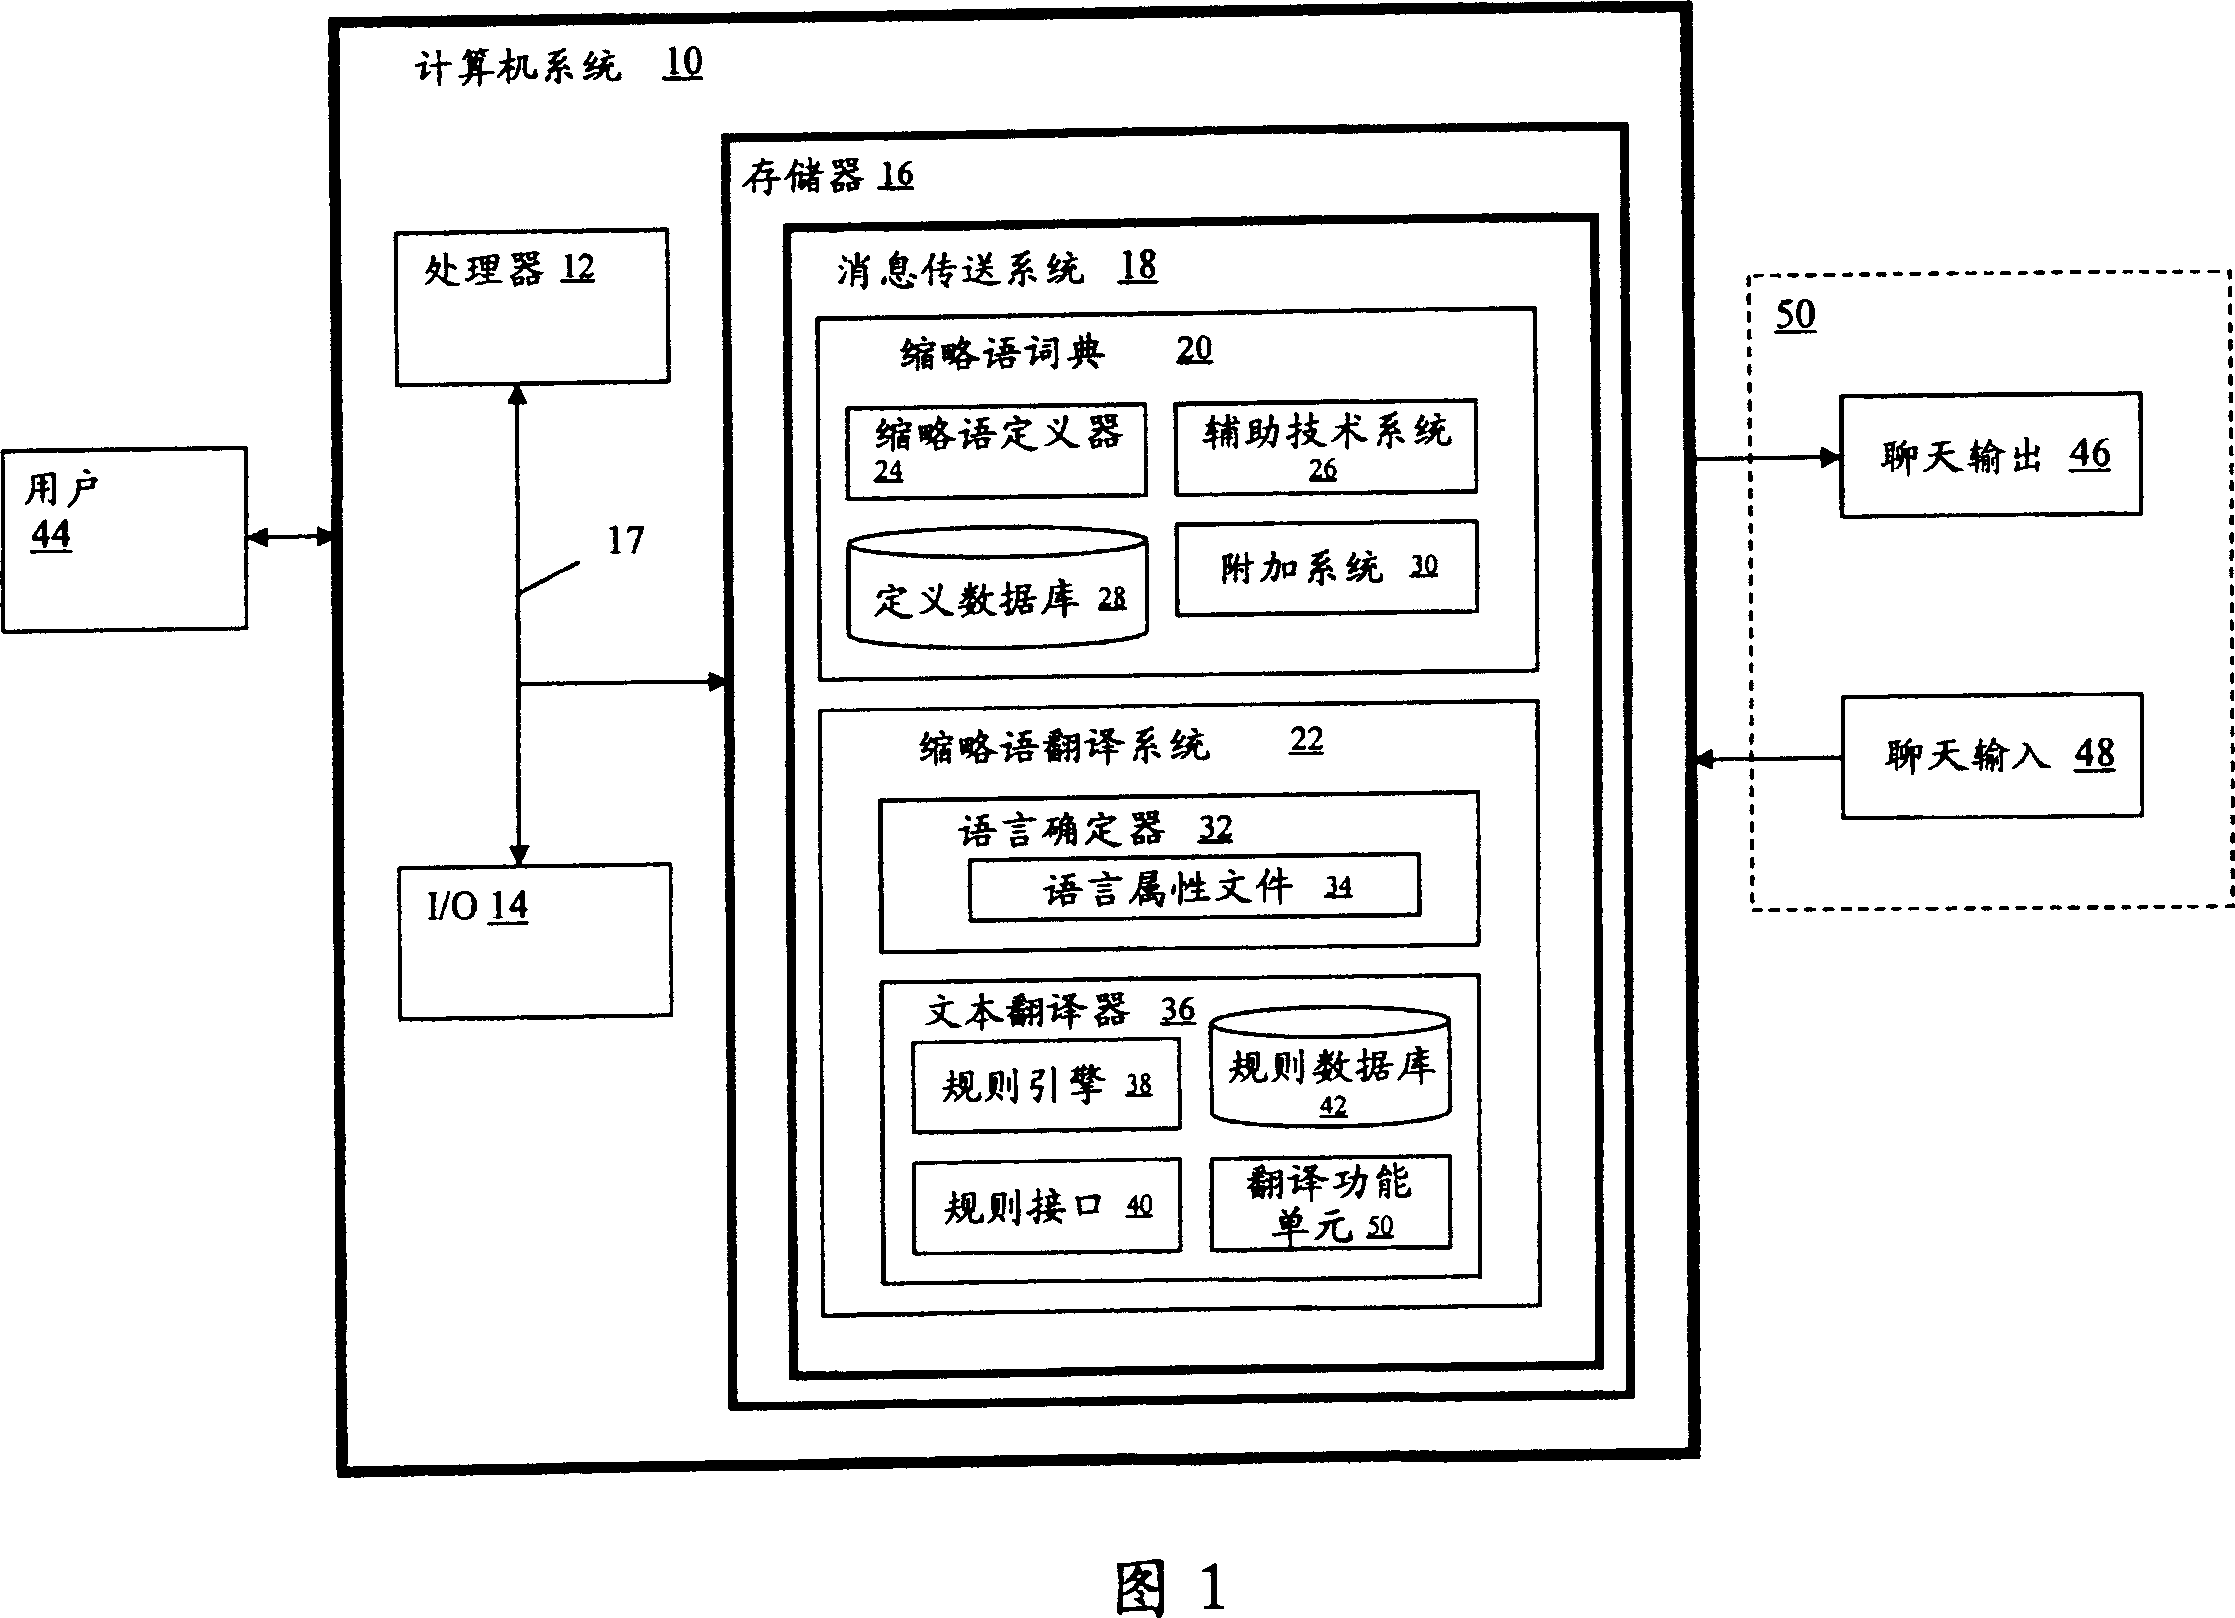 System and method for defining and translating chat abbreviations